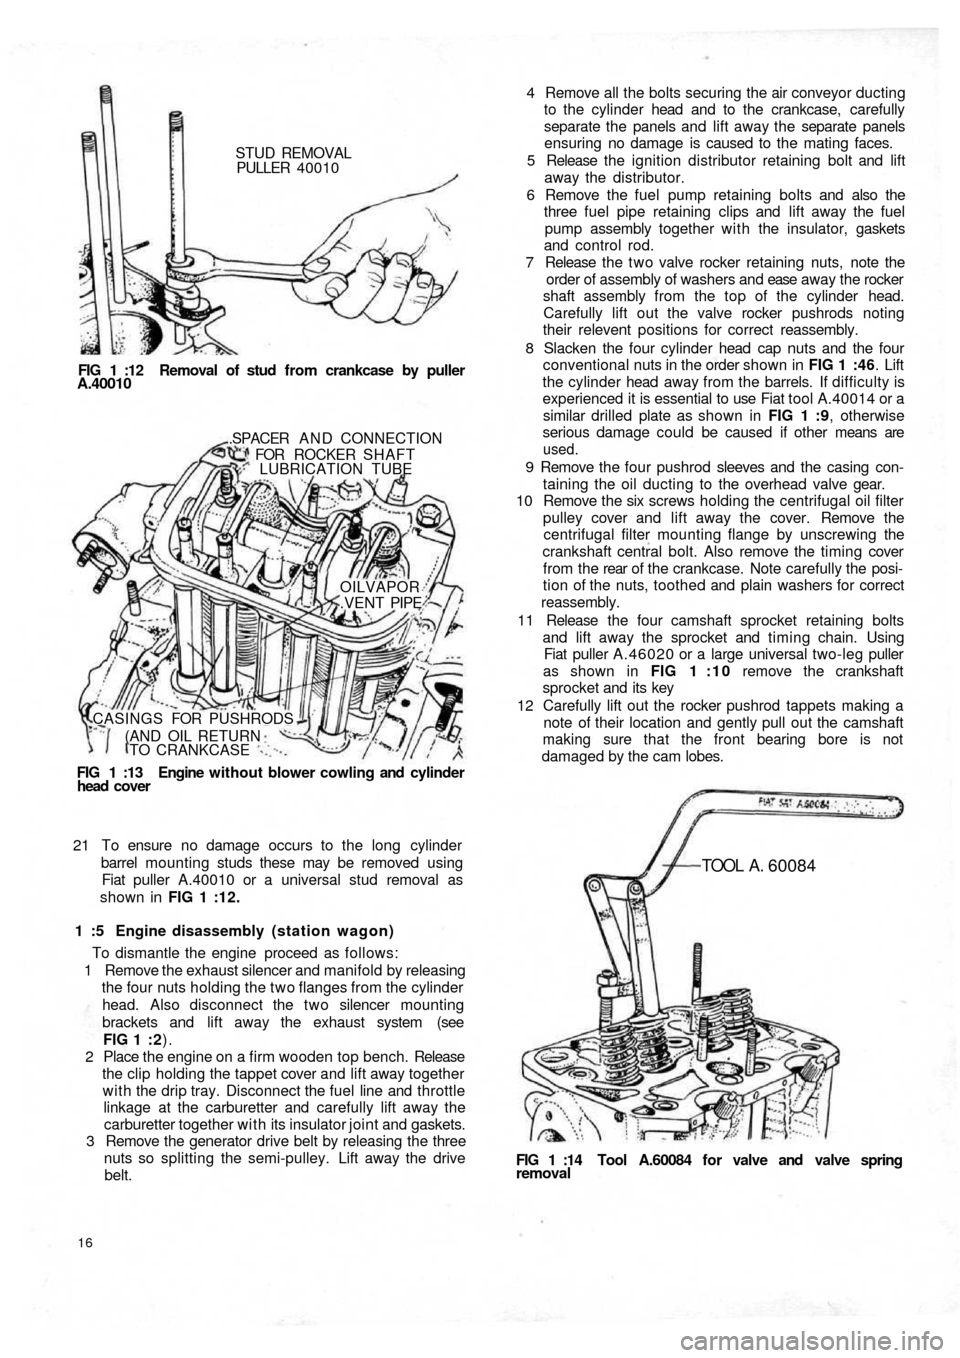 FIAT 500 1961 1.G Workshop Manual STUD REMOVAL
PULLER  40010
FIG 1 :12  Removal of stud from crankcase by puller
A.40010
FIG  1  :13   Engine  without blower cowling and cylinder
head  cover.SPACER  A N D  CONNECTION
FOR ROCKER SHAFT
